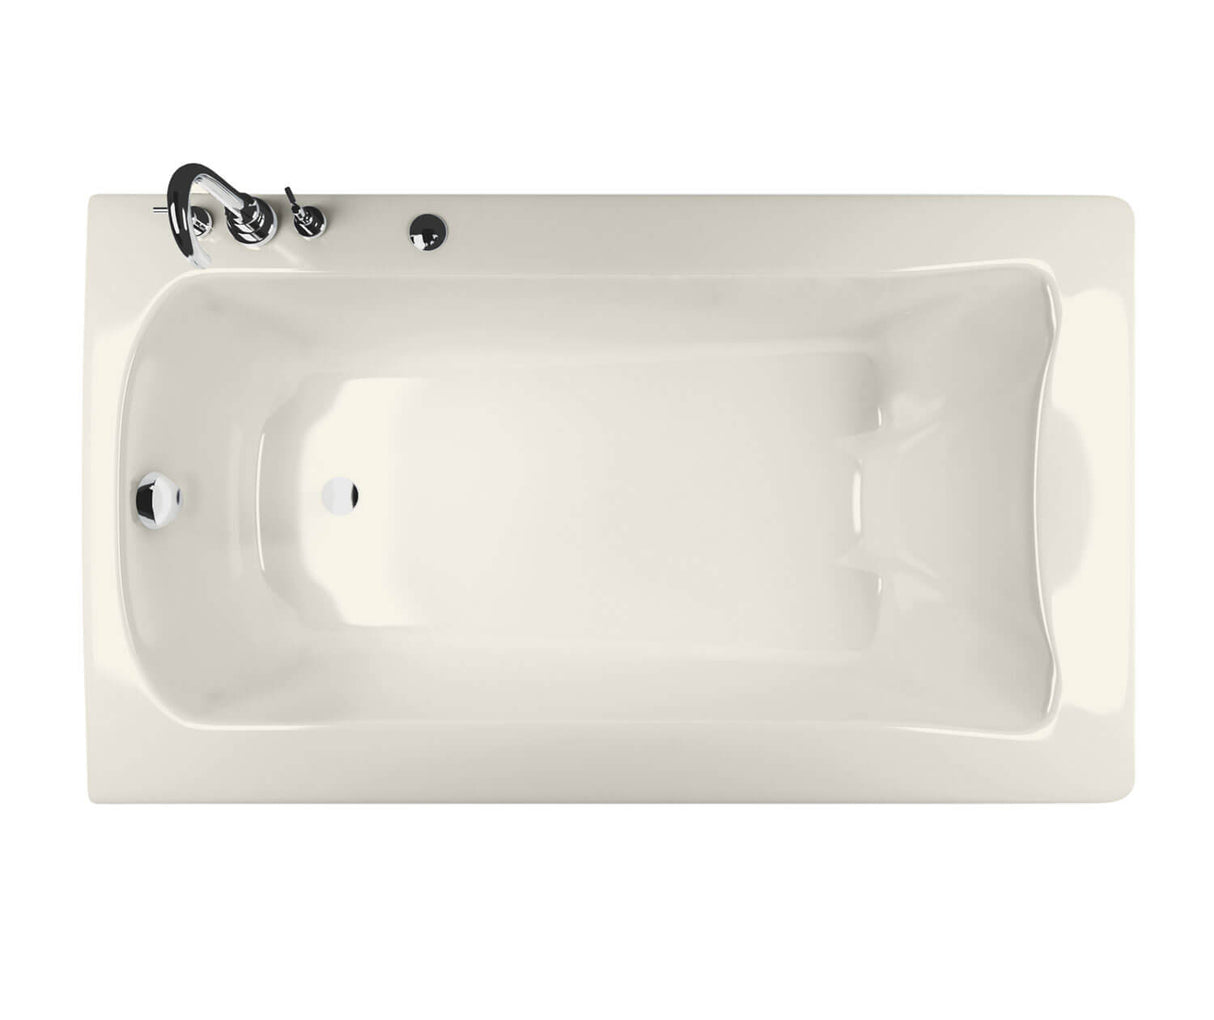 MAAX 105310-L-004-007 Release 6032 Acrylic Drop-in Left-Hand Drain Hydromax Bathtub in Biscuit